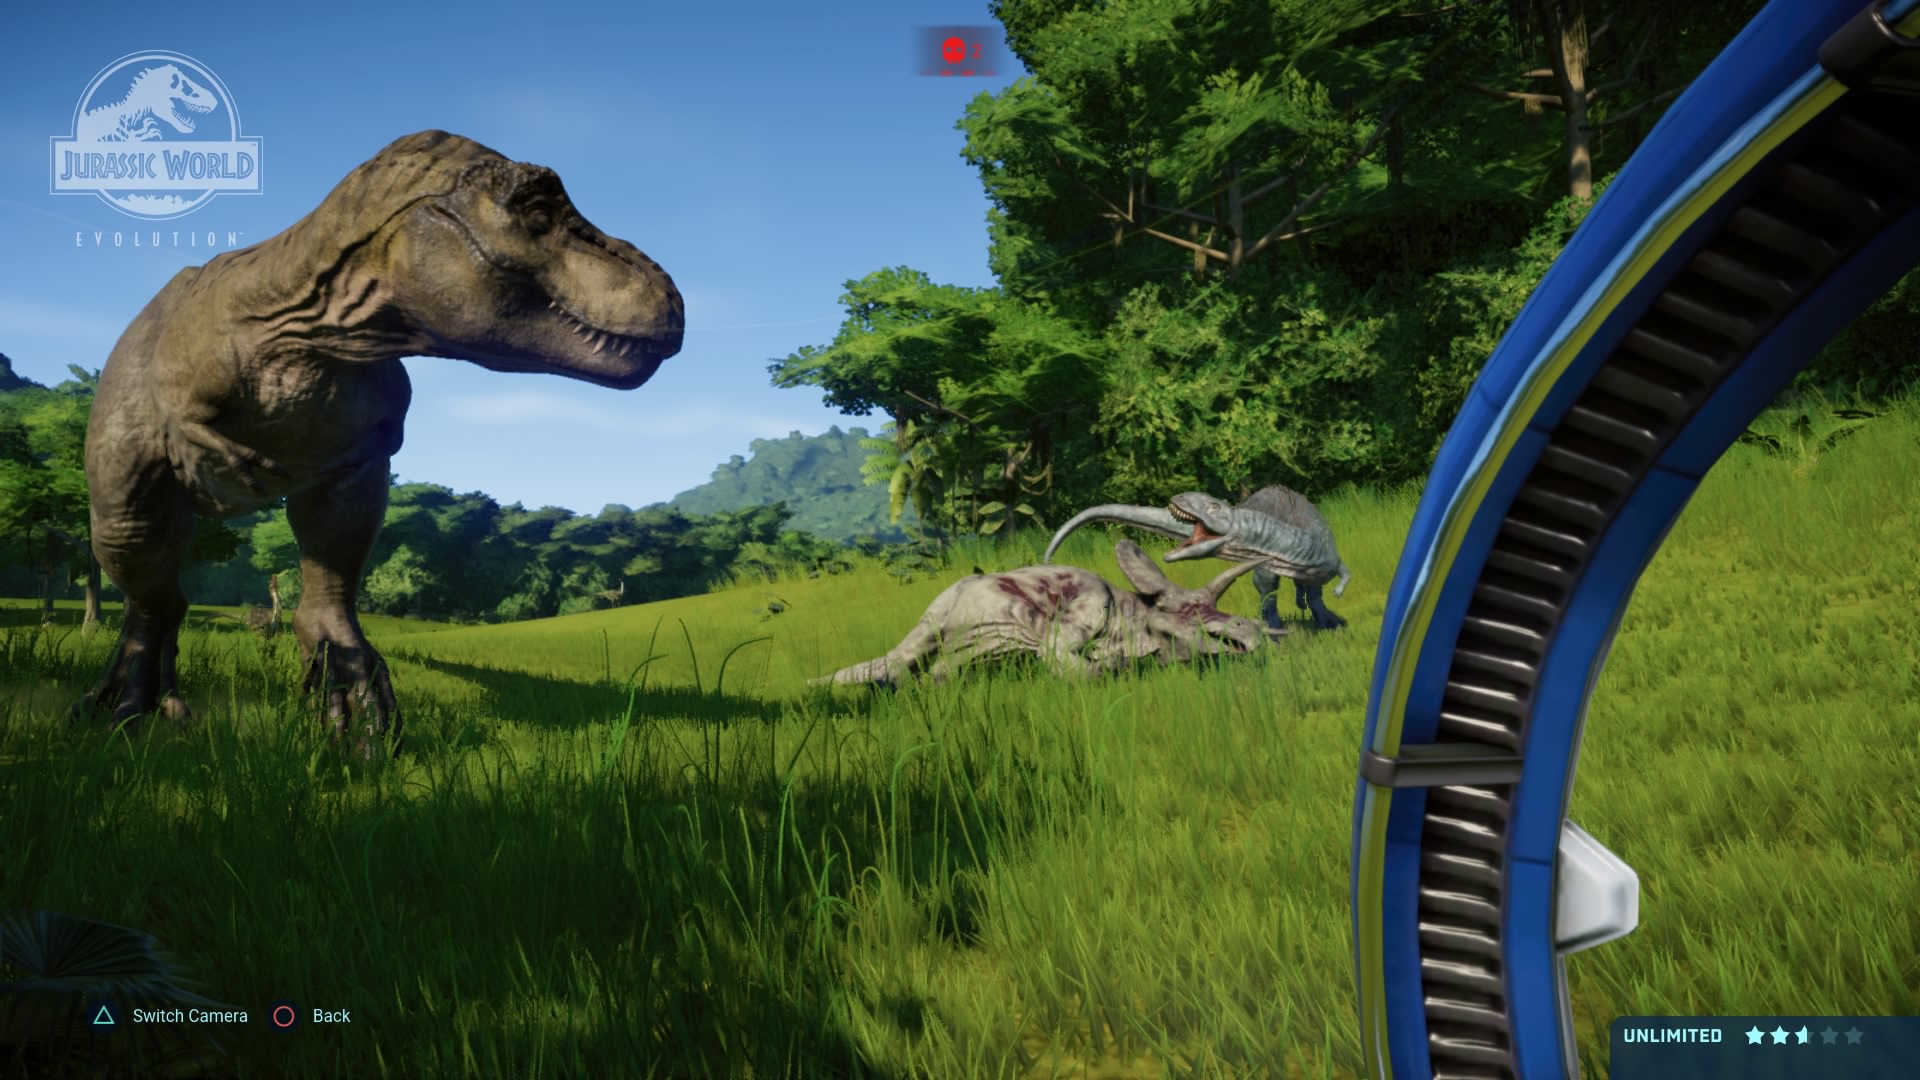 Favorite Moments playing Jurassic World Evolution | Frontier Forums